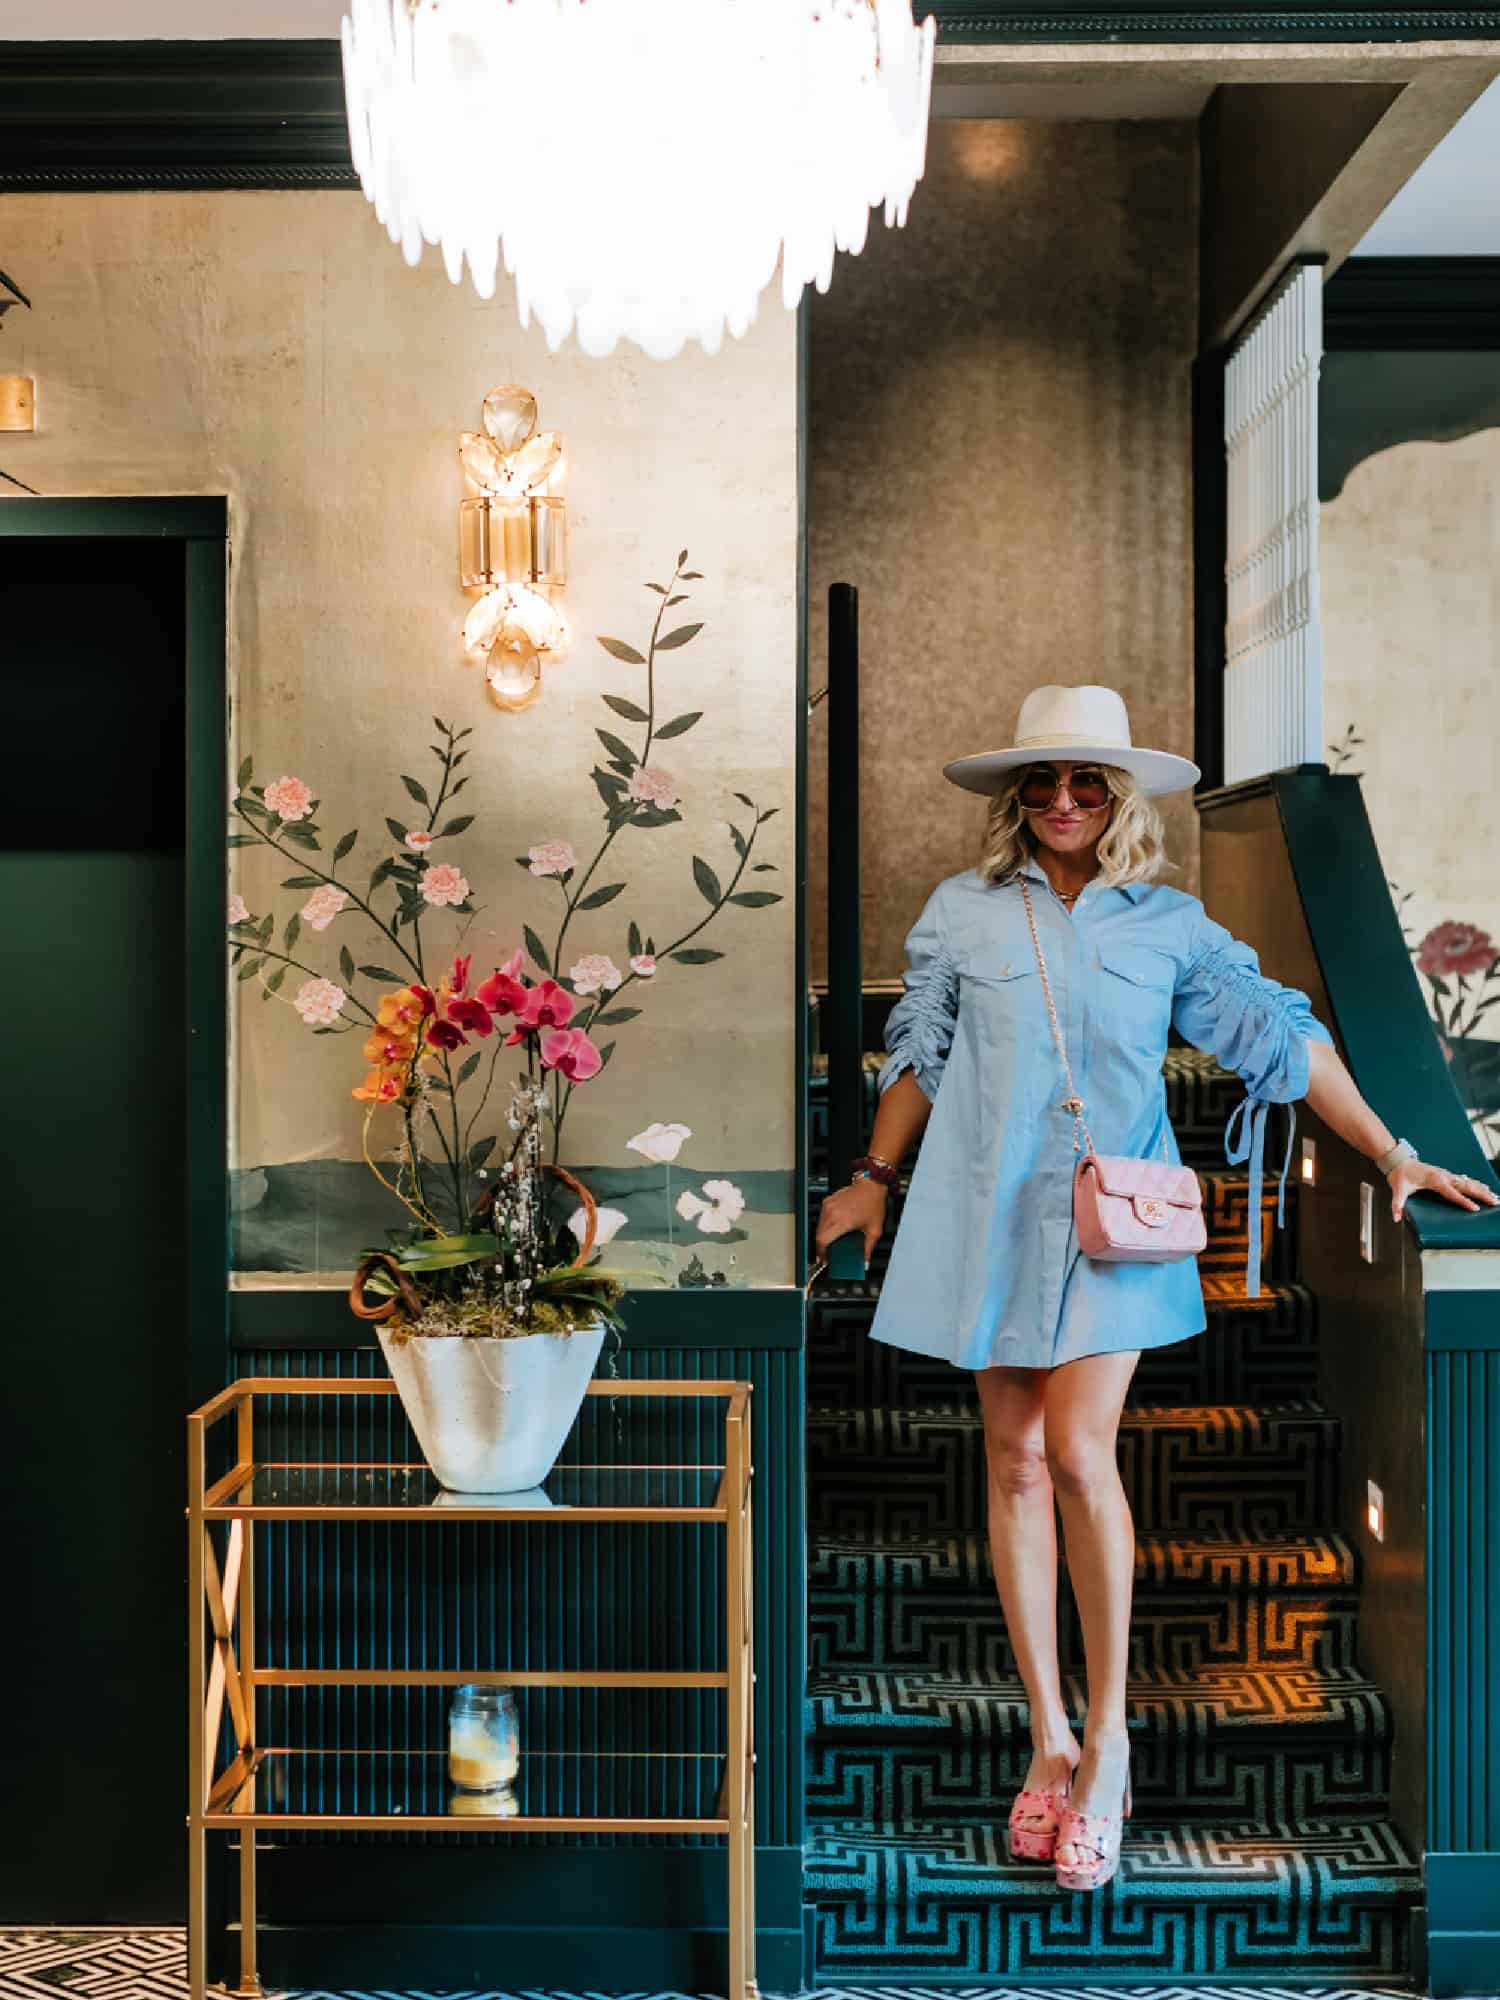 A woman standing on a step next to beautiful floral wallpaper, and a planter on a gold and glass table. She is wearing a light blue shirt-dress and a cream colored hat.